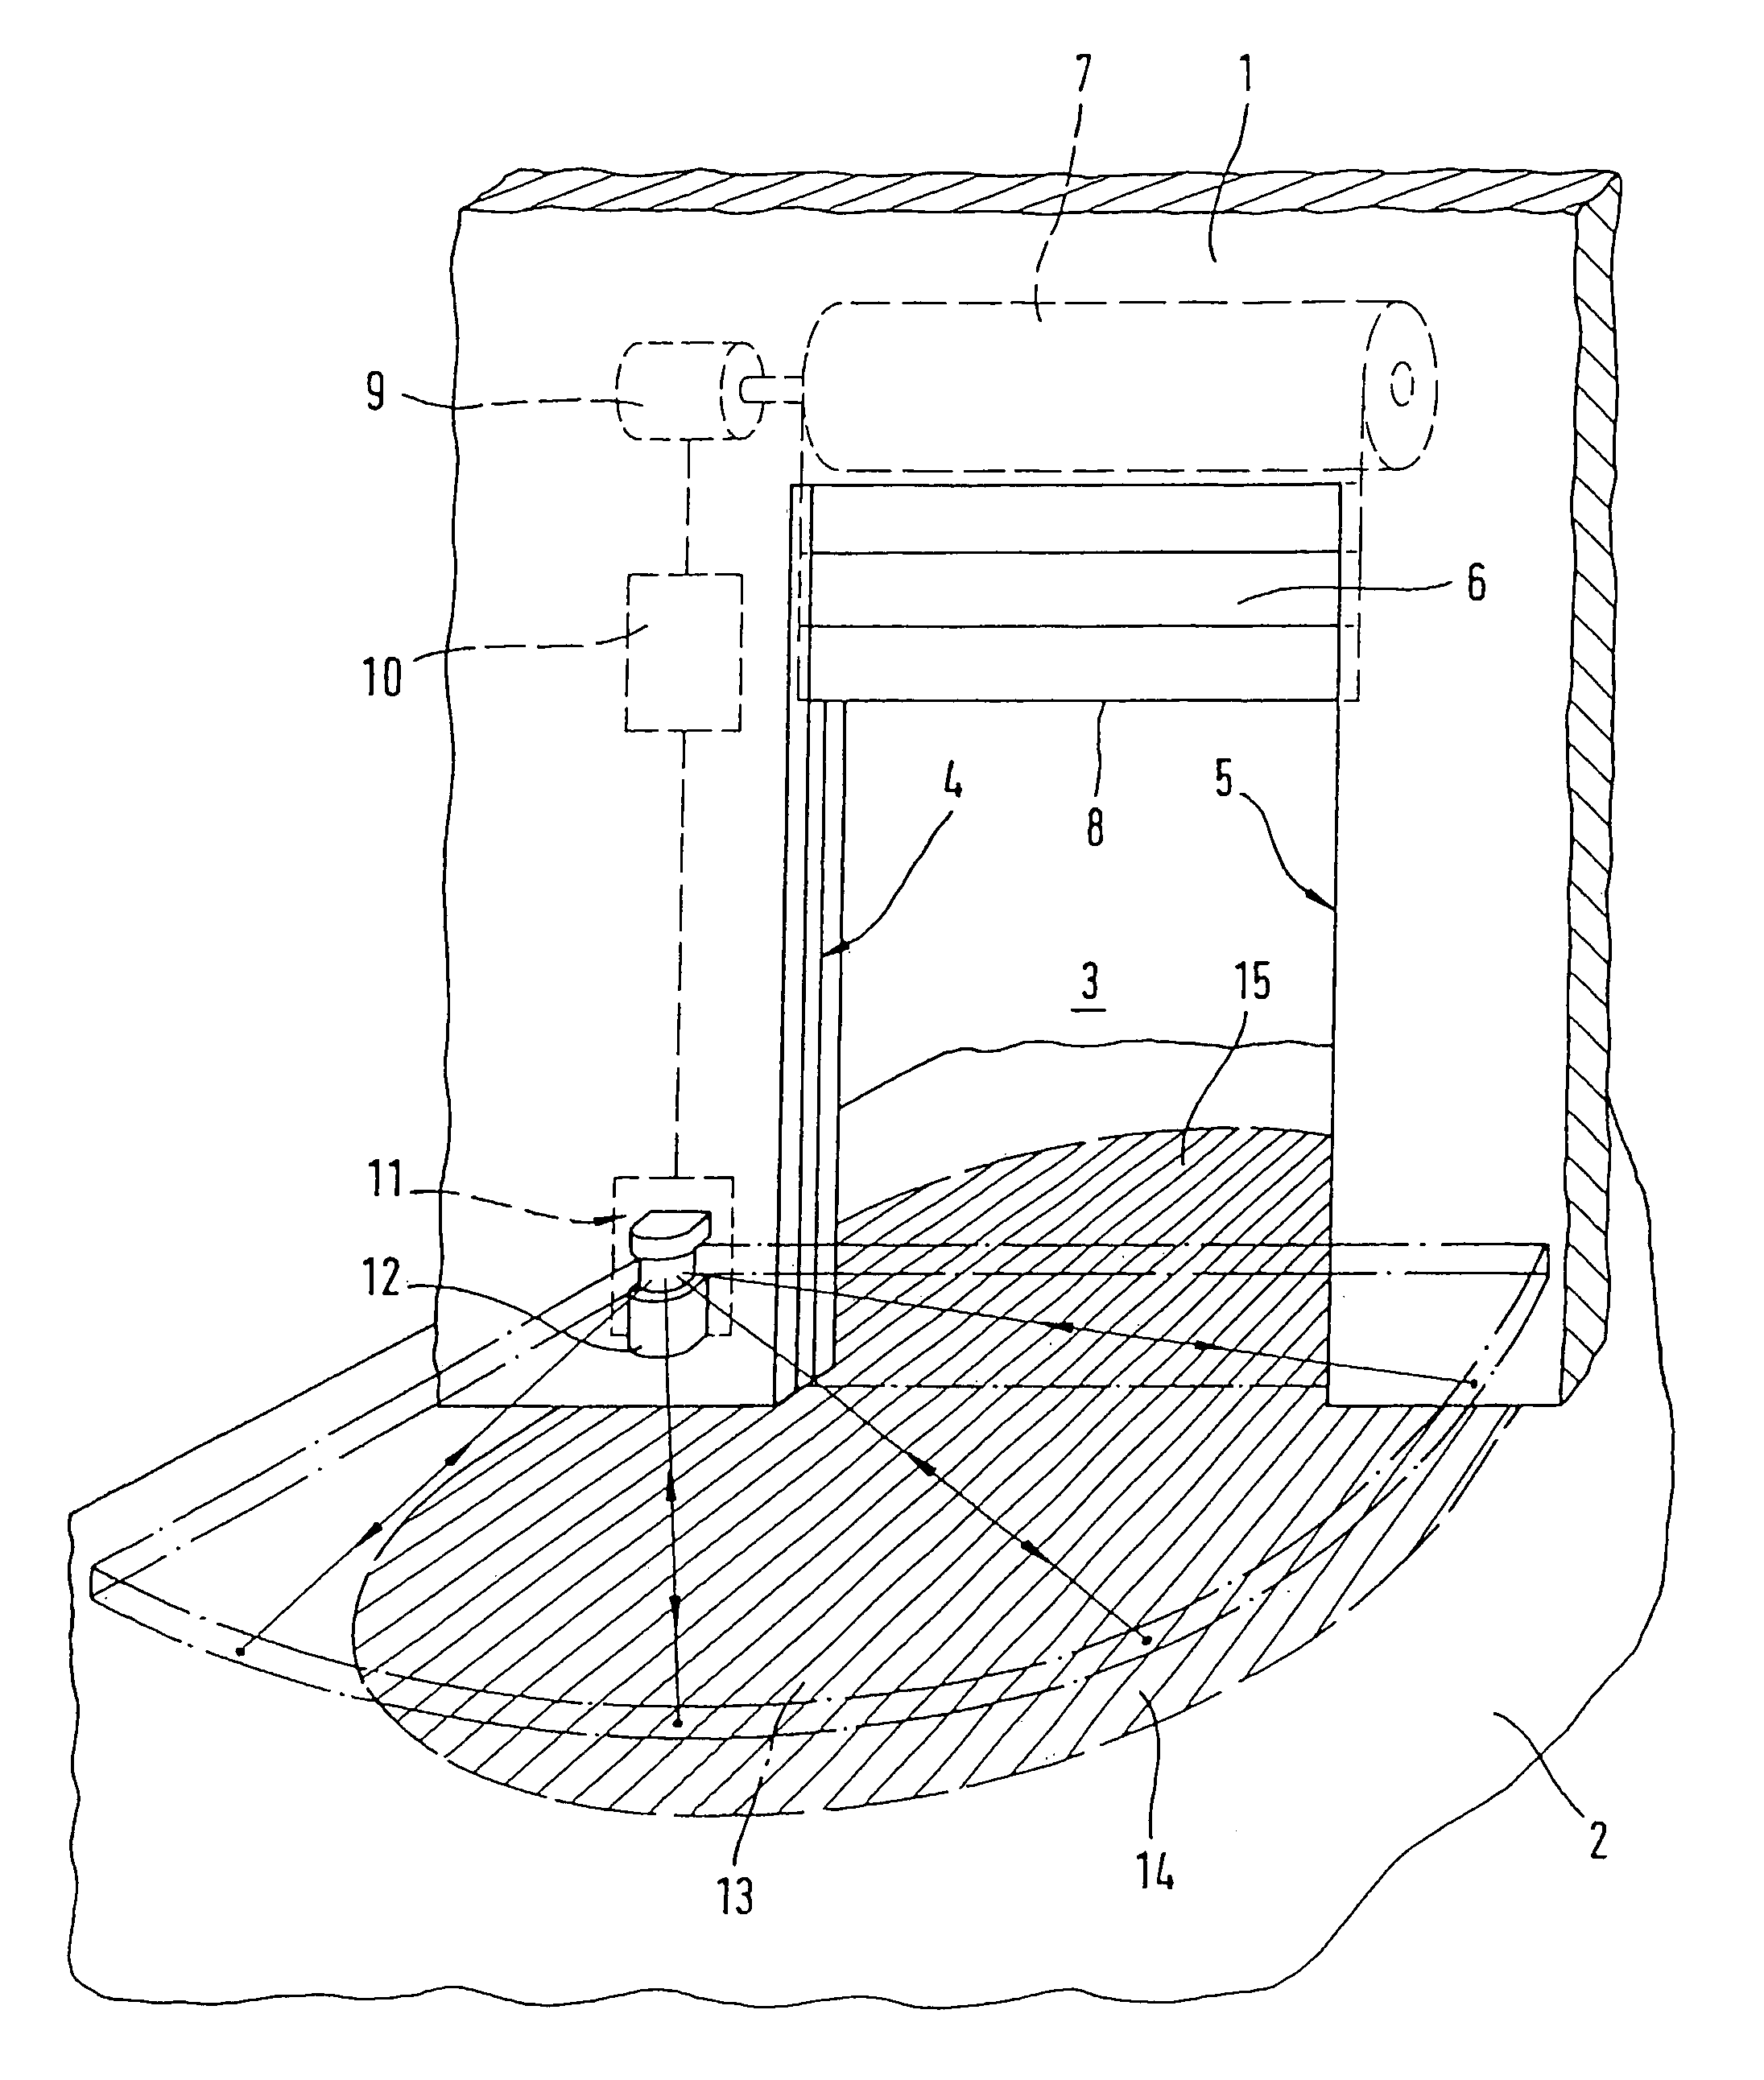 Device for automatically actuating a door, in particular a vertical door